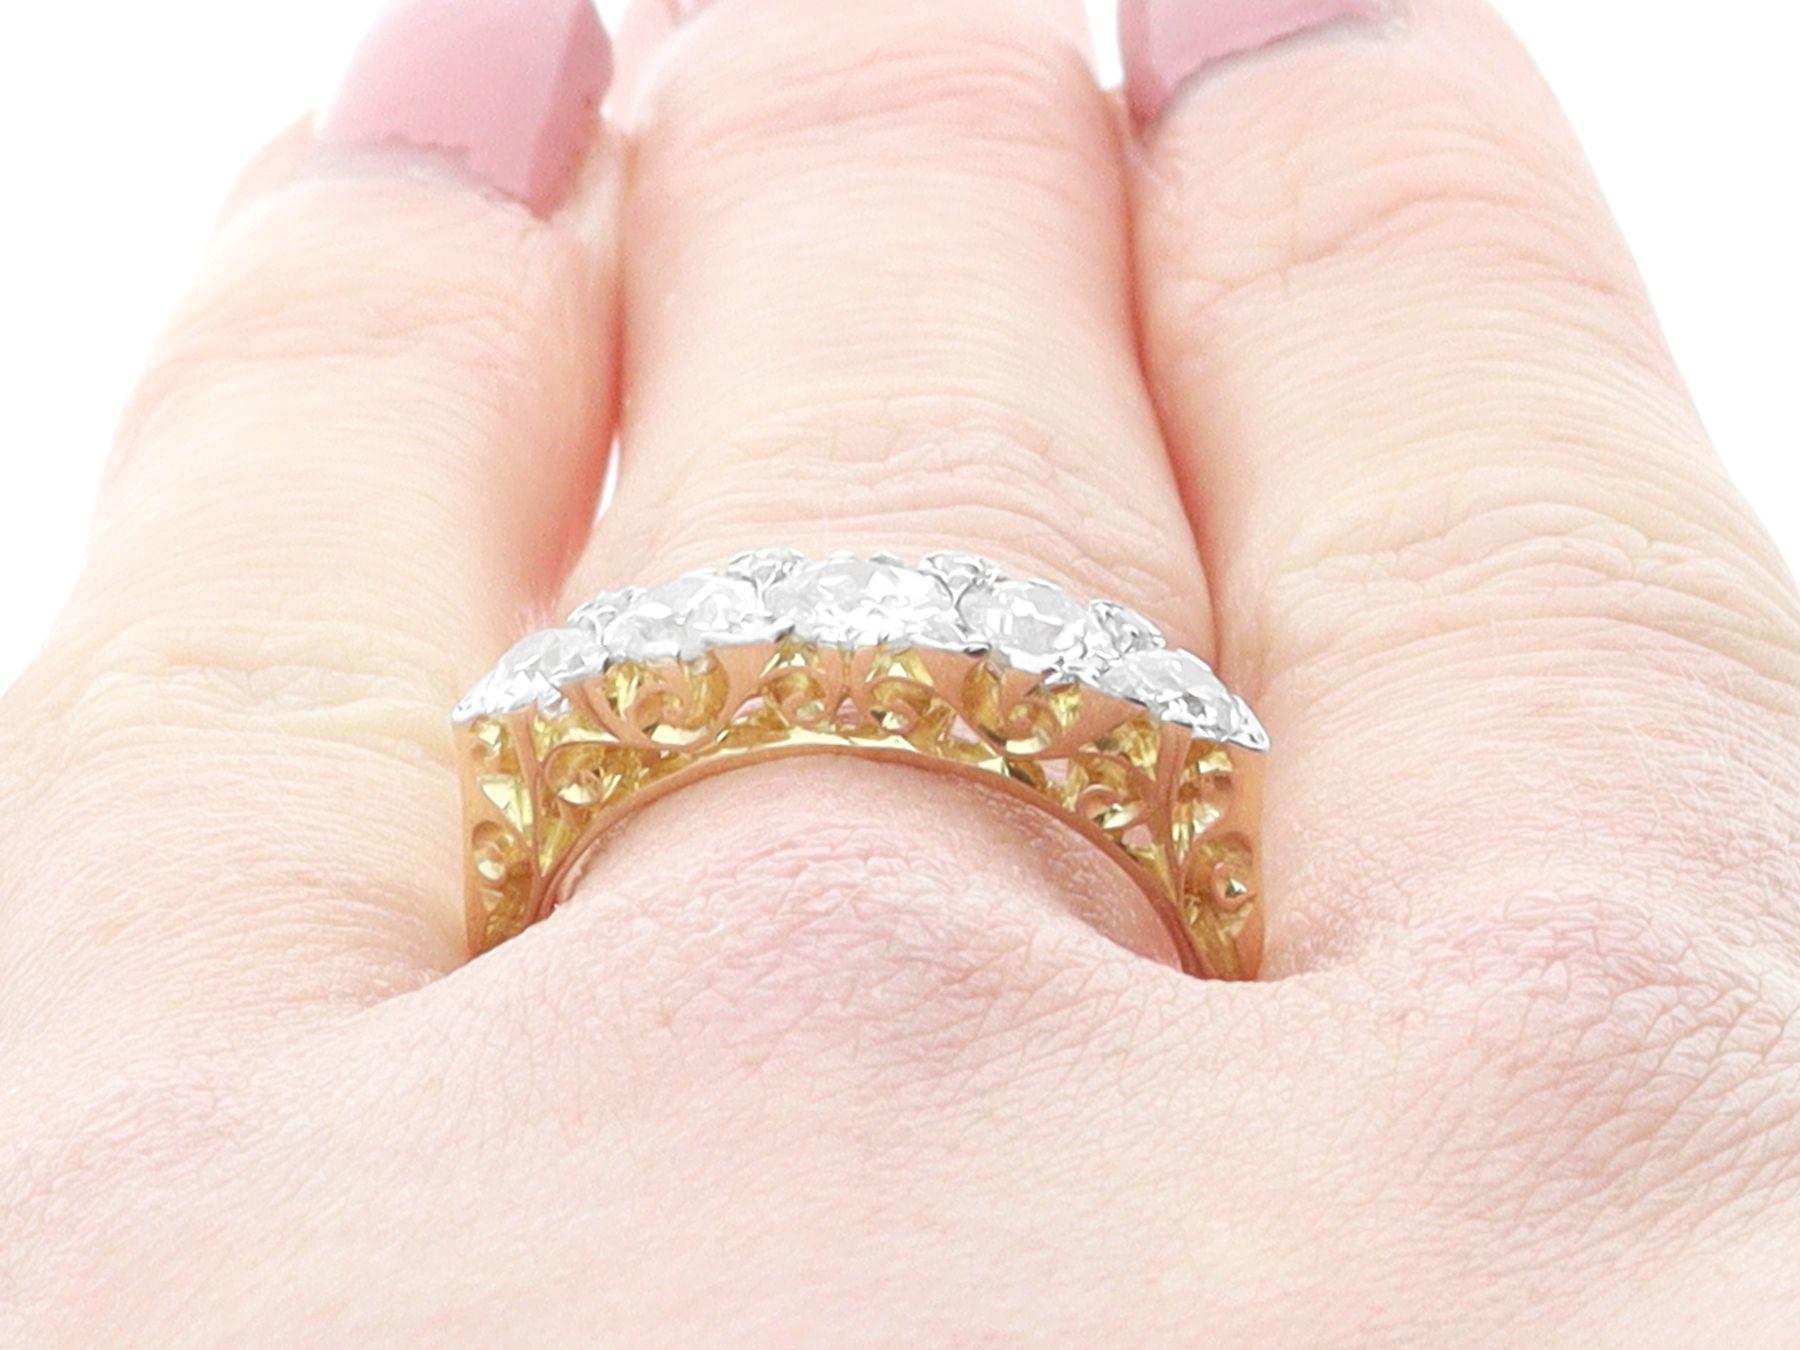 Antique 1.83 Carat Diamond and 18k Yellow Gold Dress Ring For Sale 3